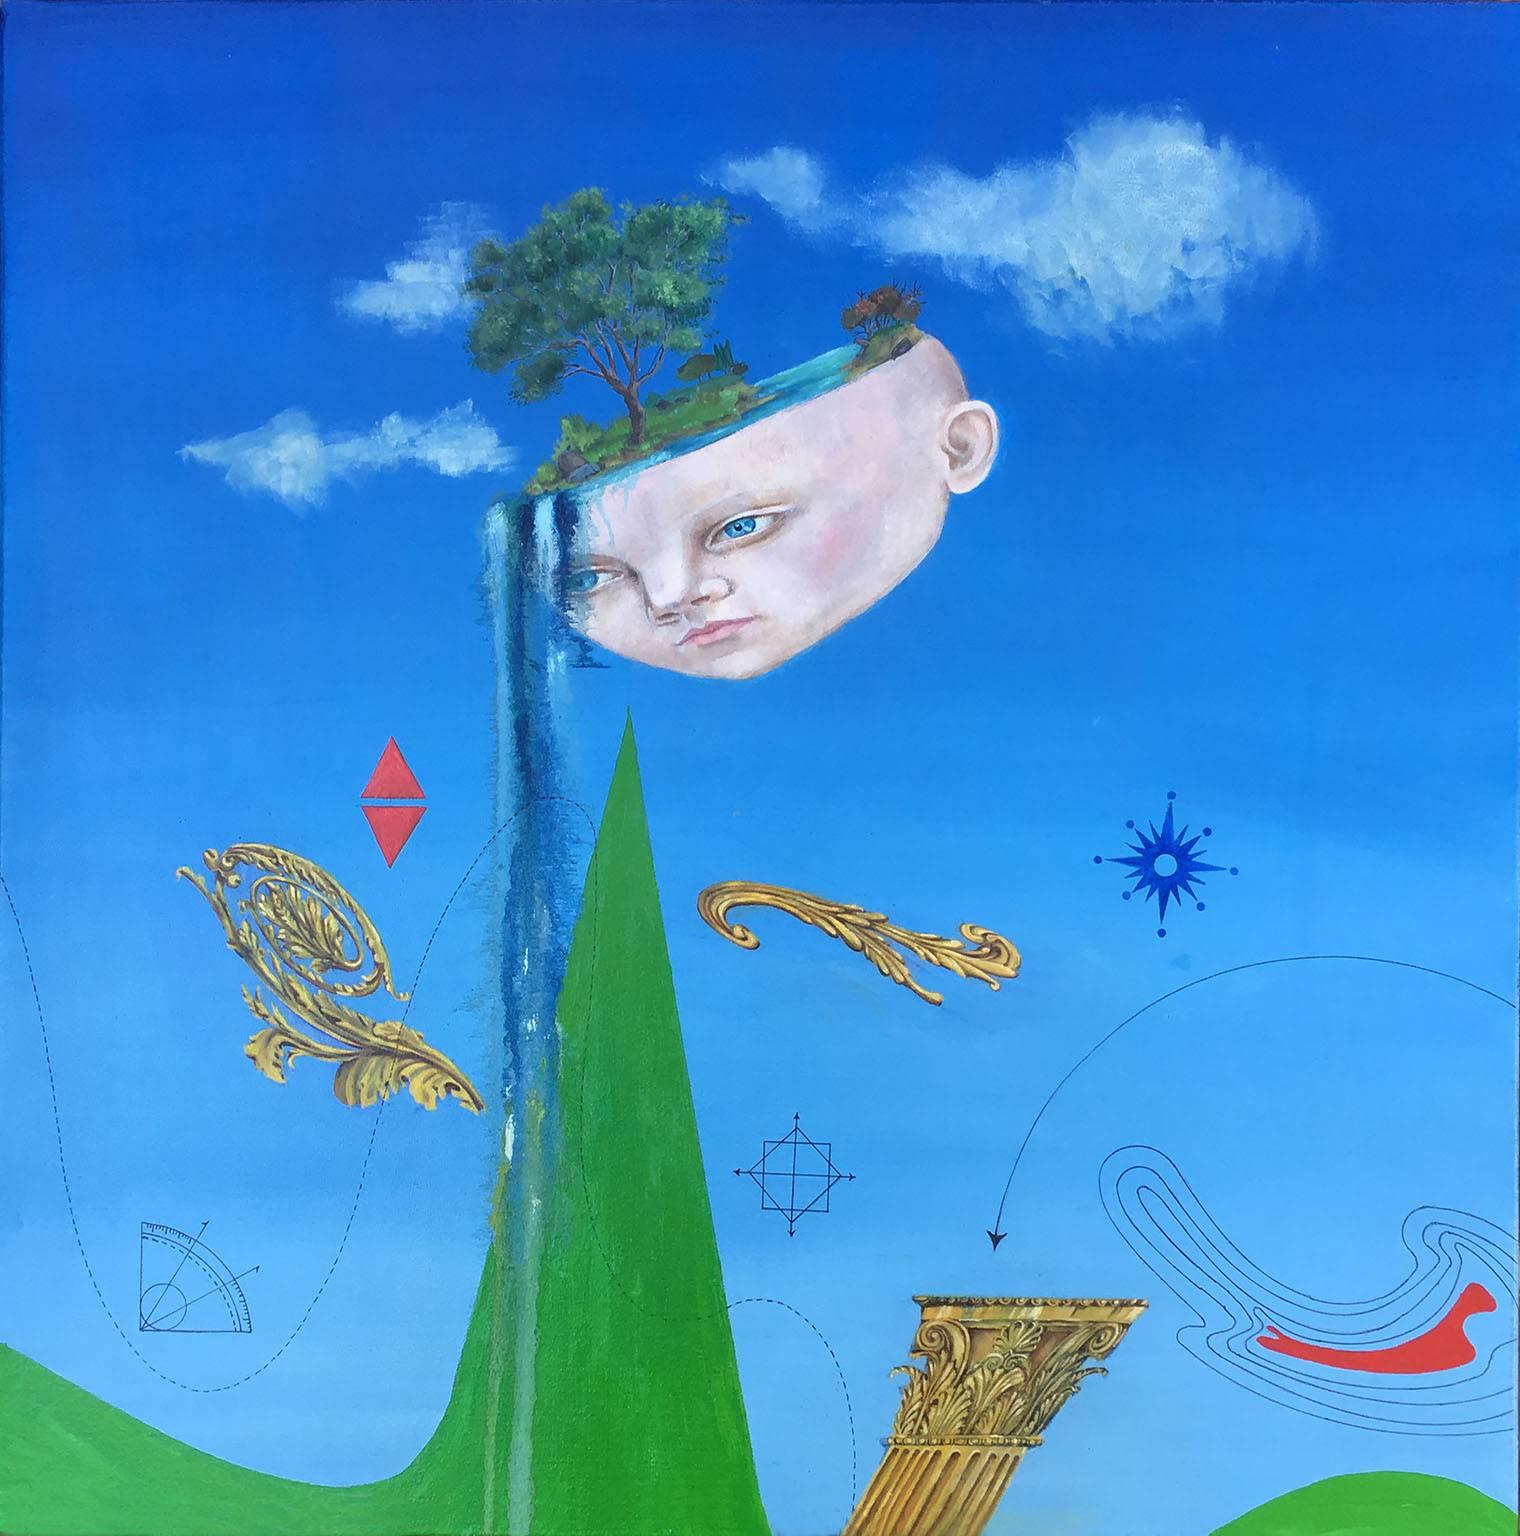 Lannie Hart Portrait Painting - "Embryo" fills blue sky with child, landscape and waterfall